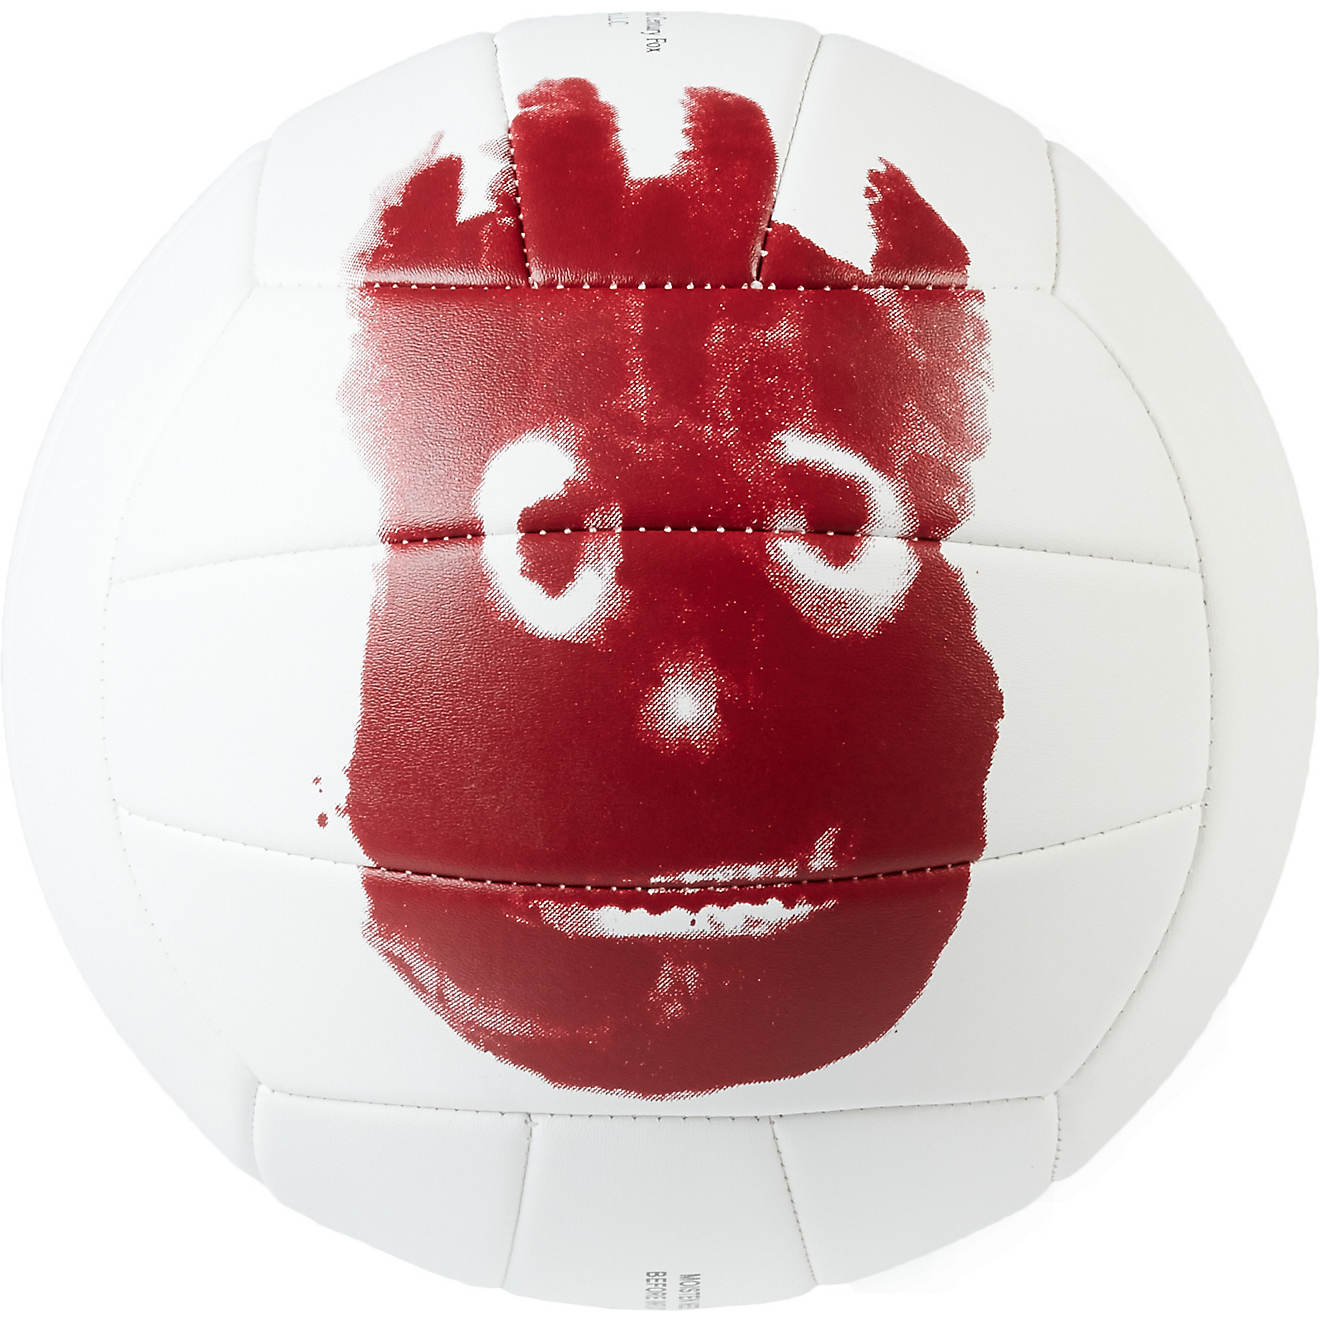 WTH4615 Wilson Cast Away Volleyball White/Red 